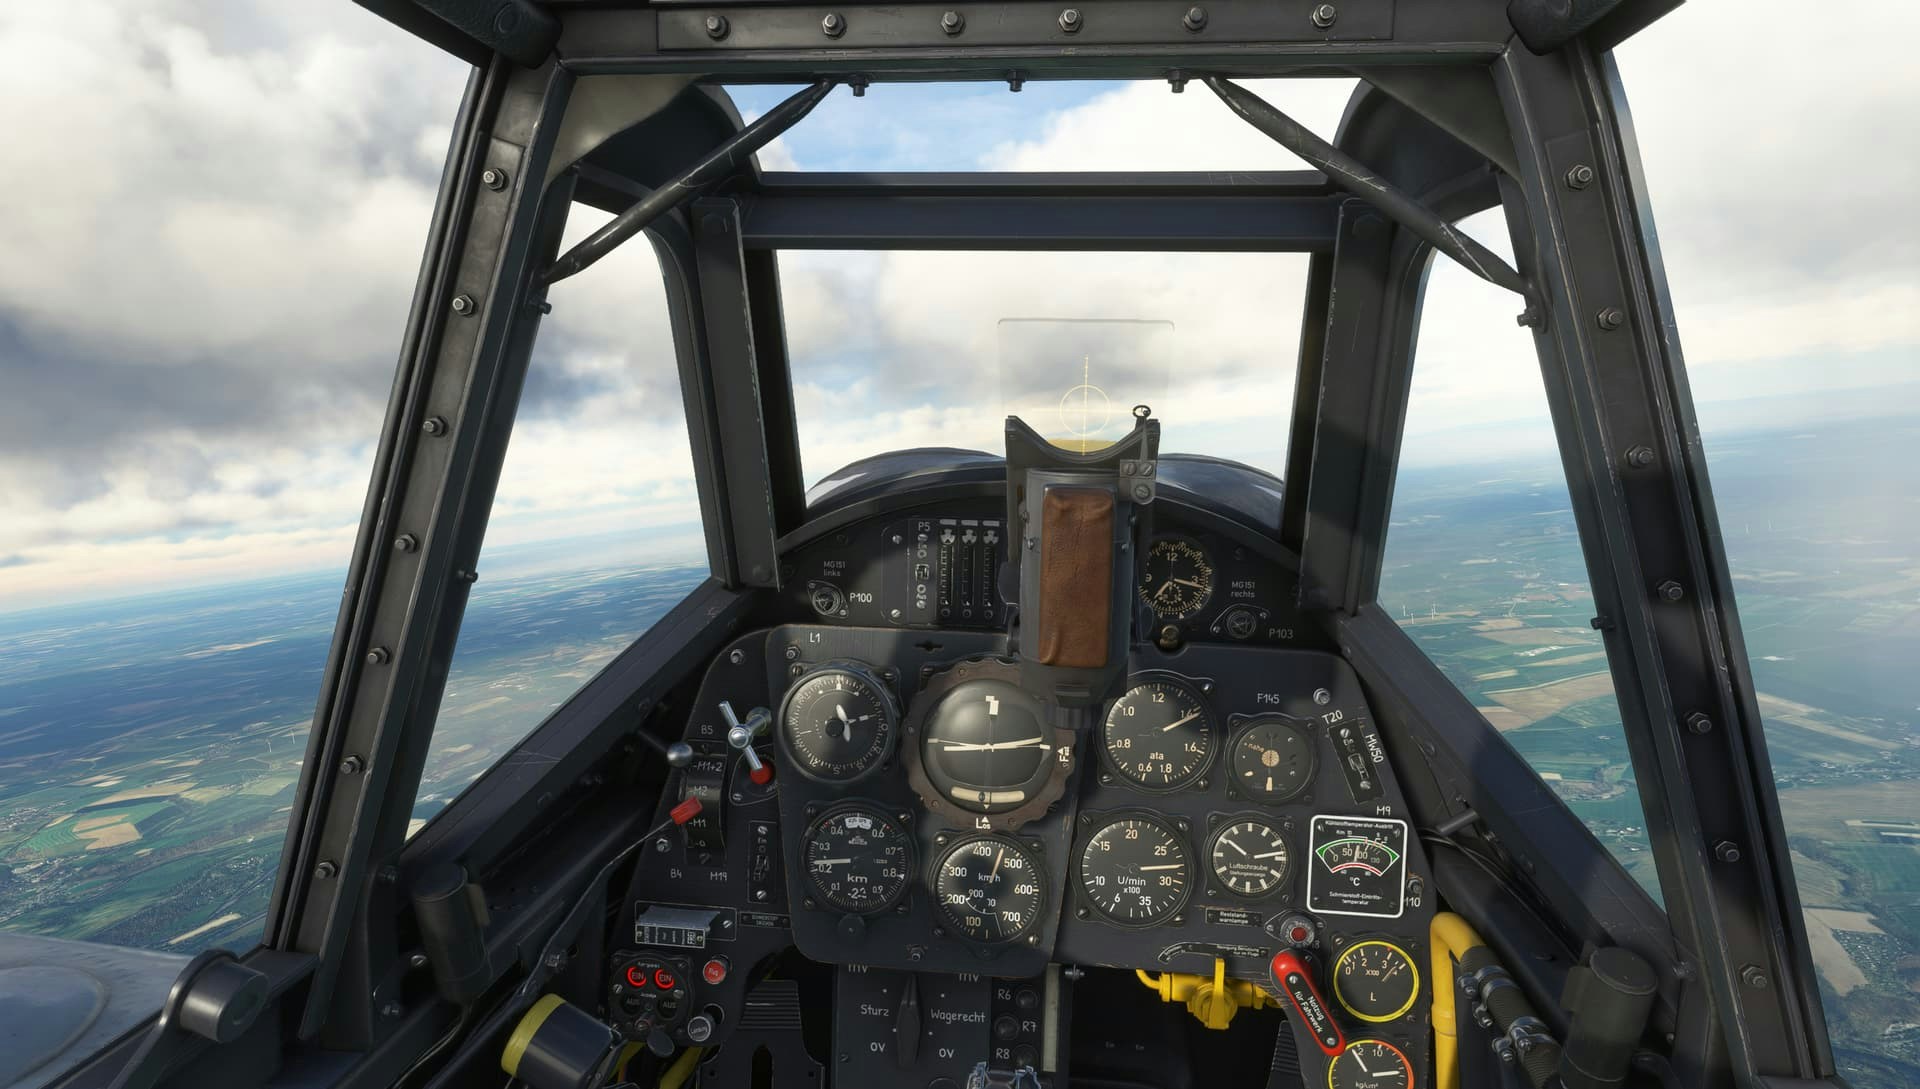 FlyingIron Simulations Bf 109 to Release Next Week